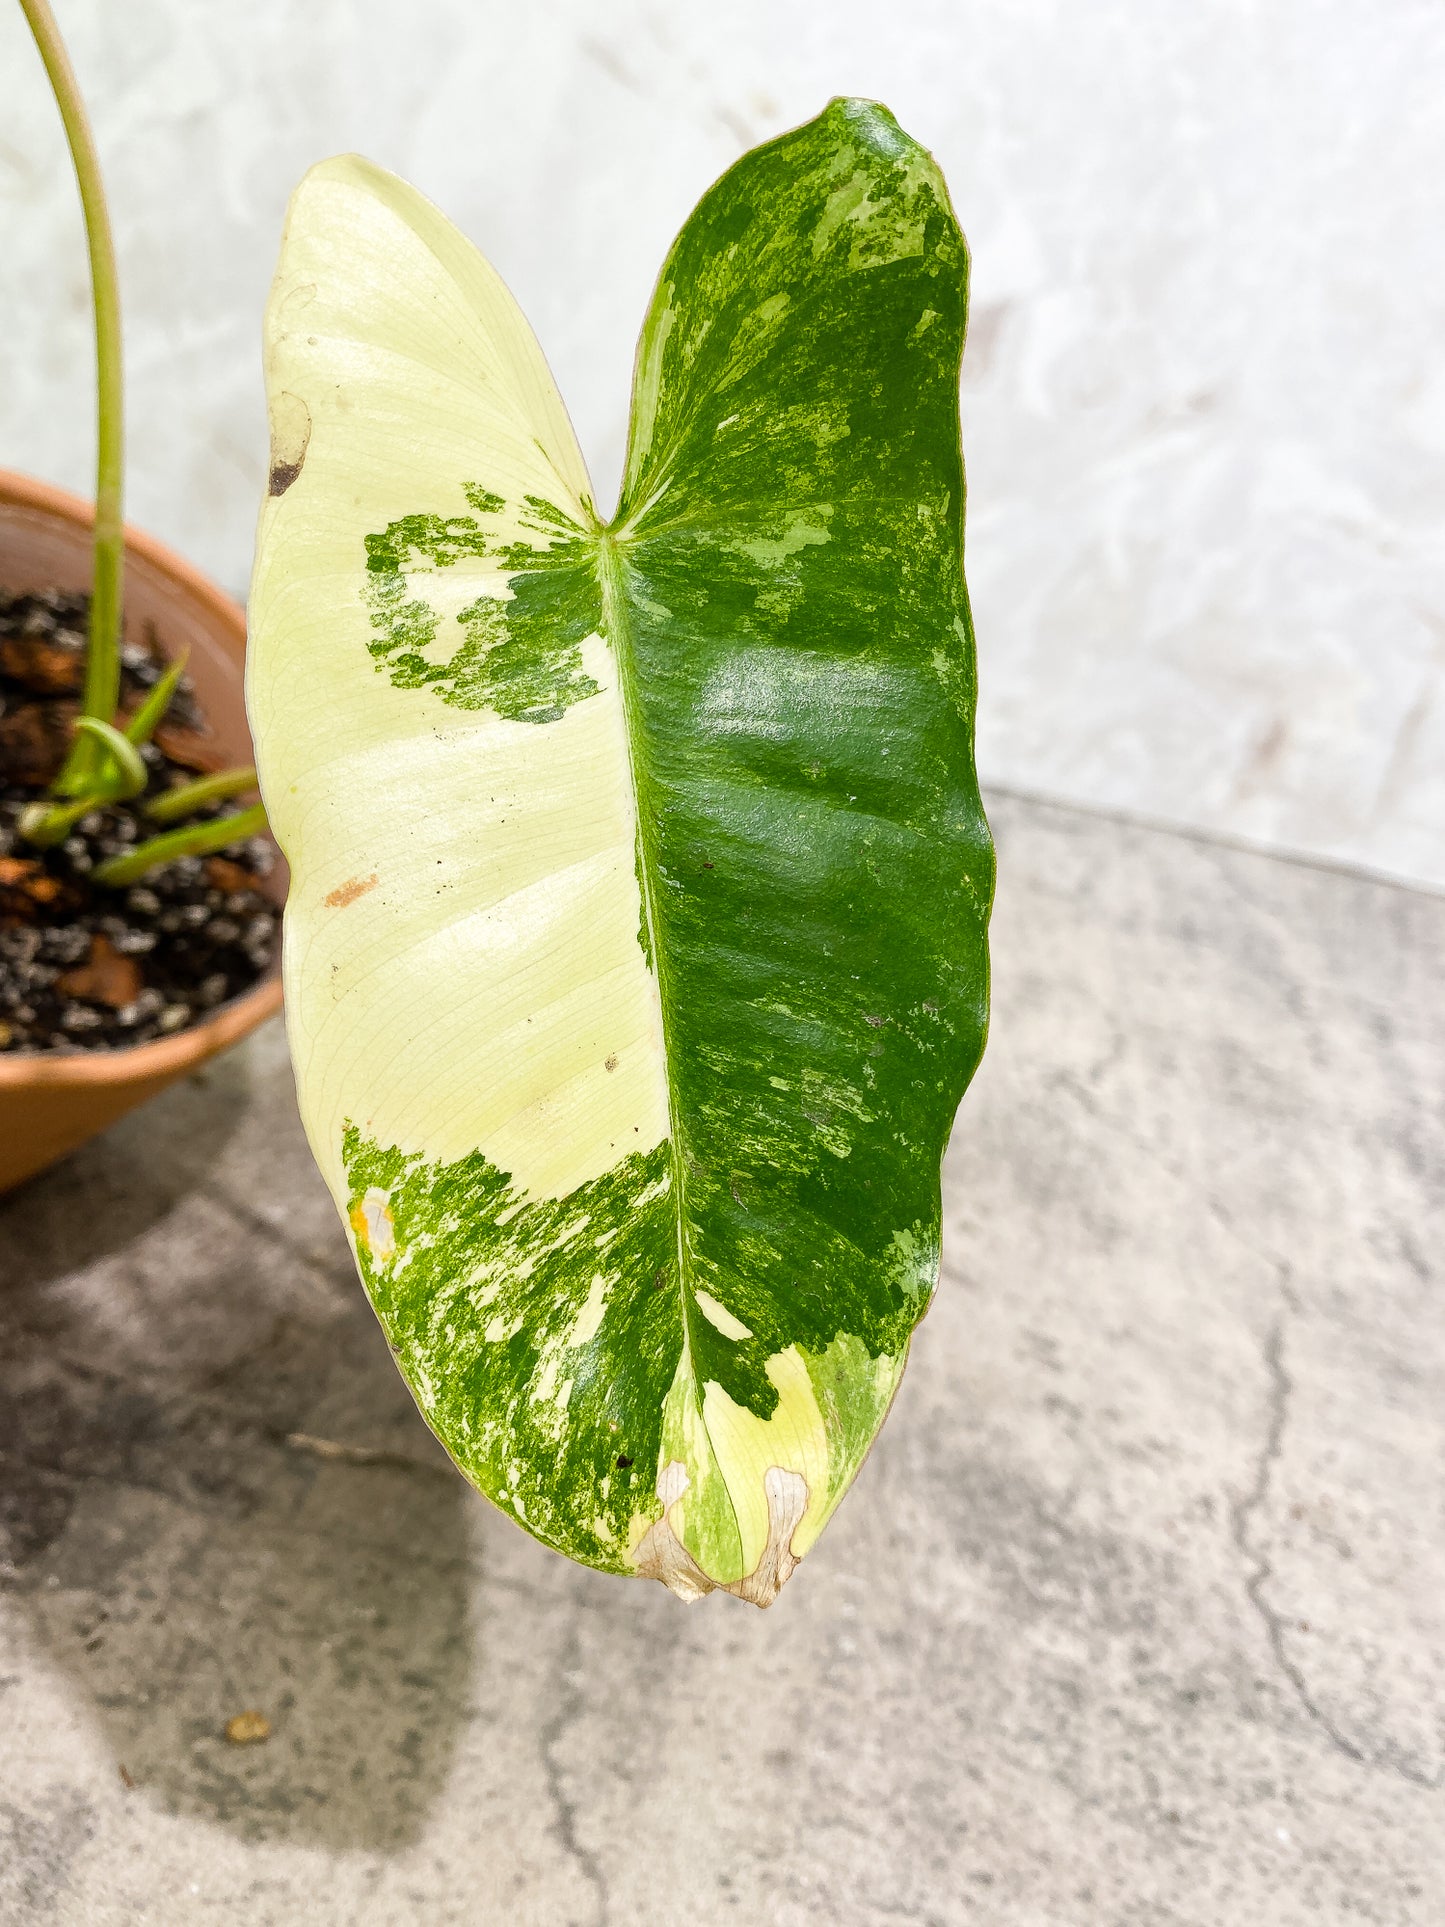 Philodendron Burl Marx Variegated 3 leaves 2 sprouts fully rooted